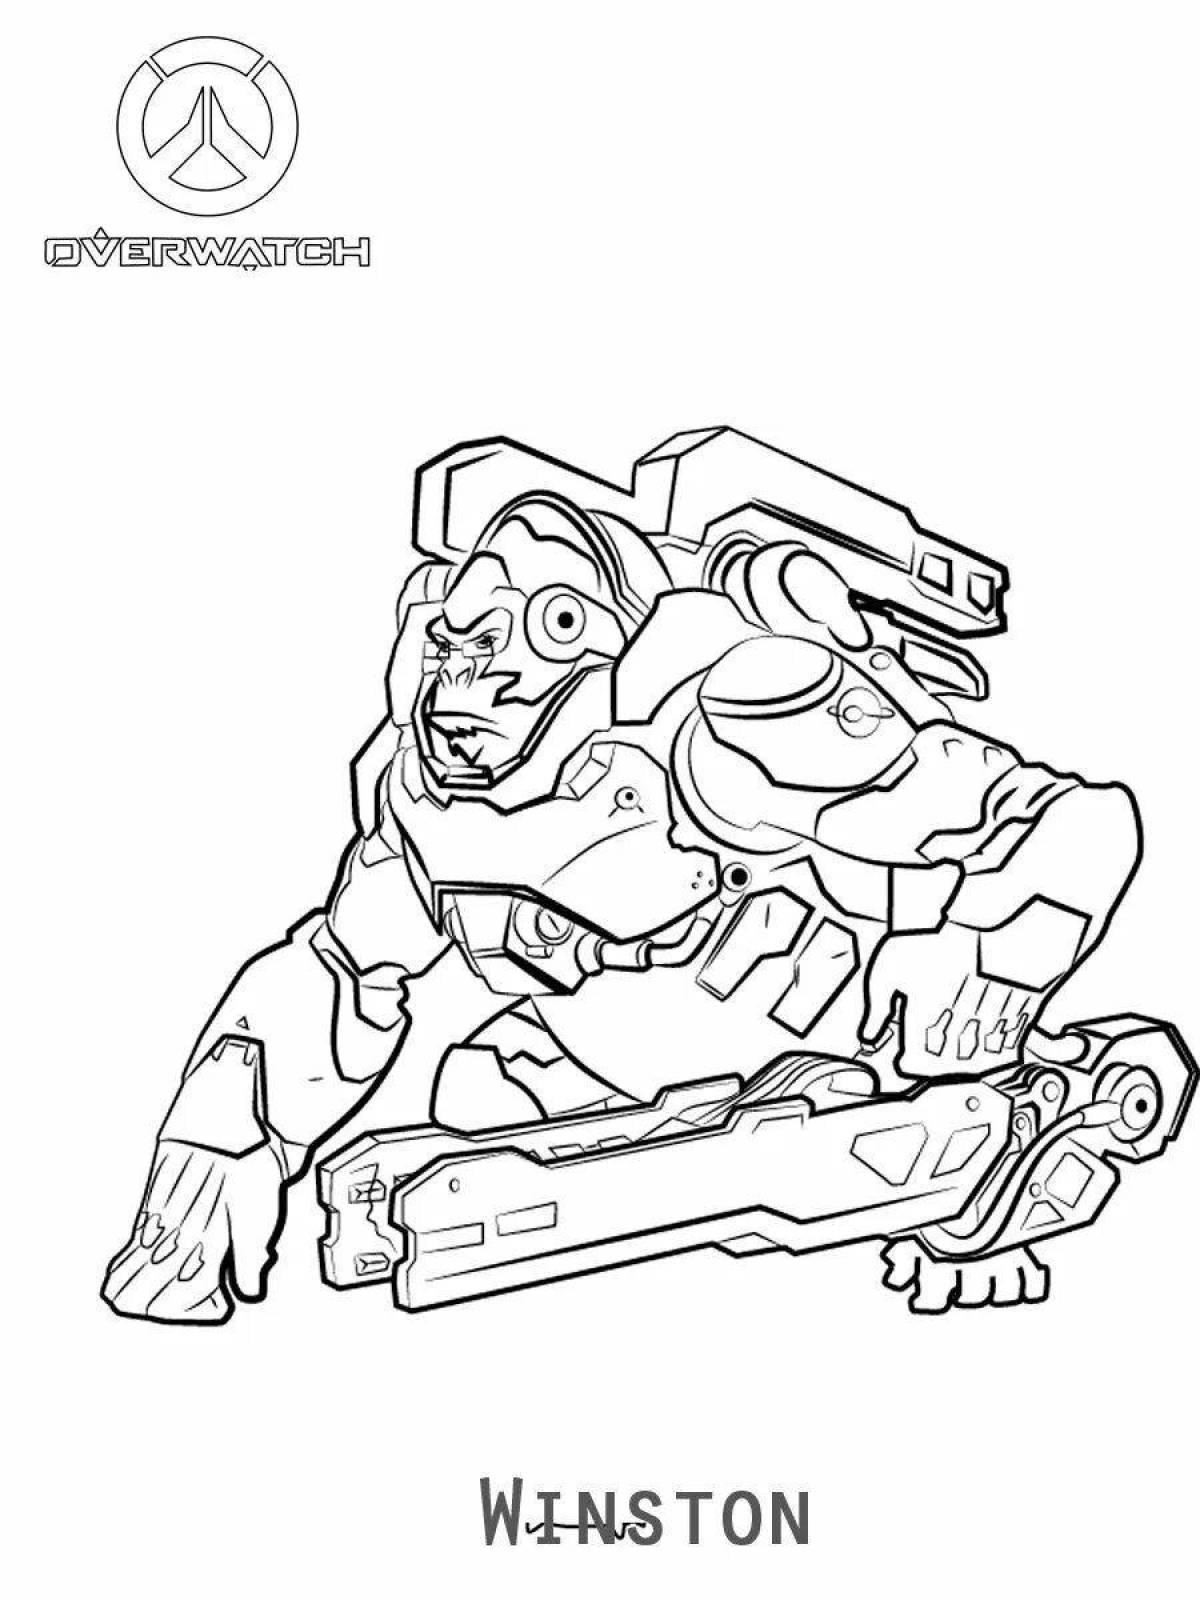 Overwatch vibrant coloring page